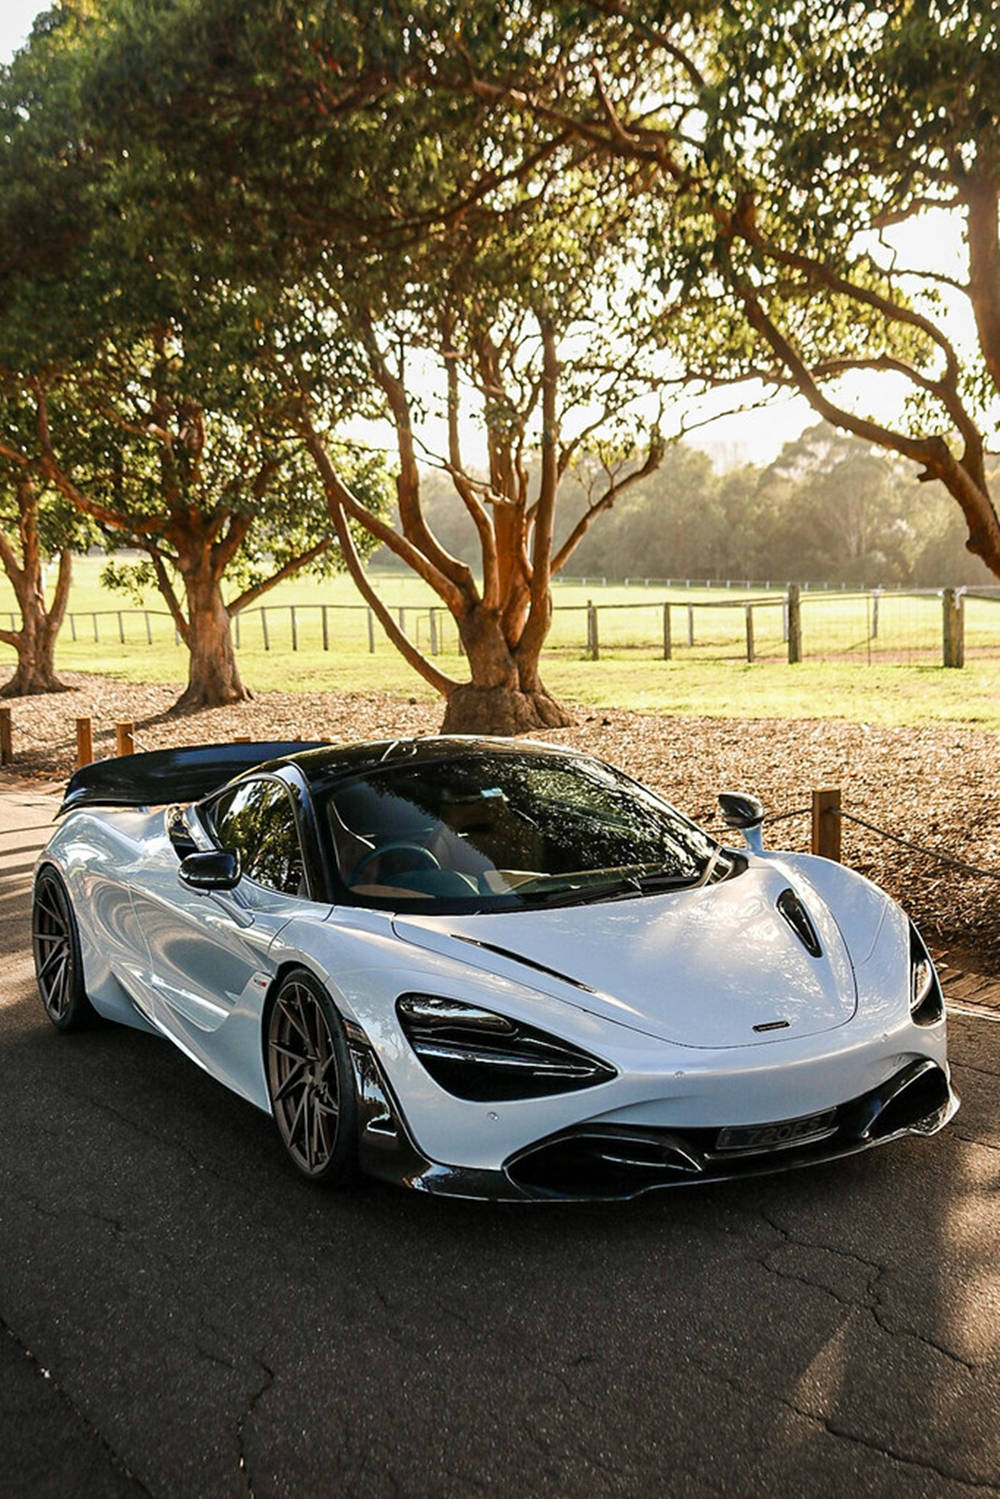 Mclaren 720s White Car By Trees Phone Background